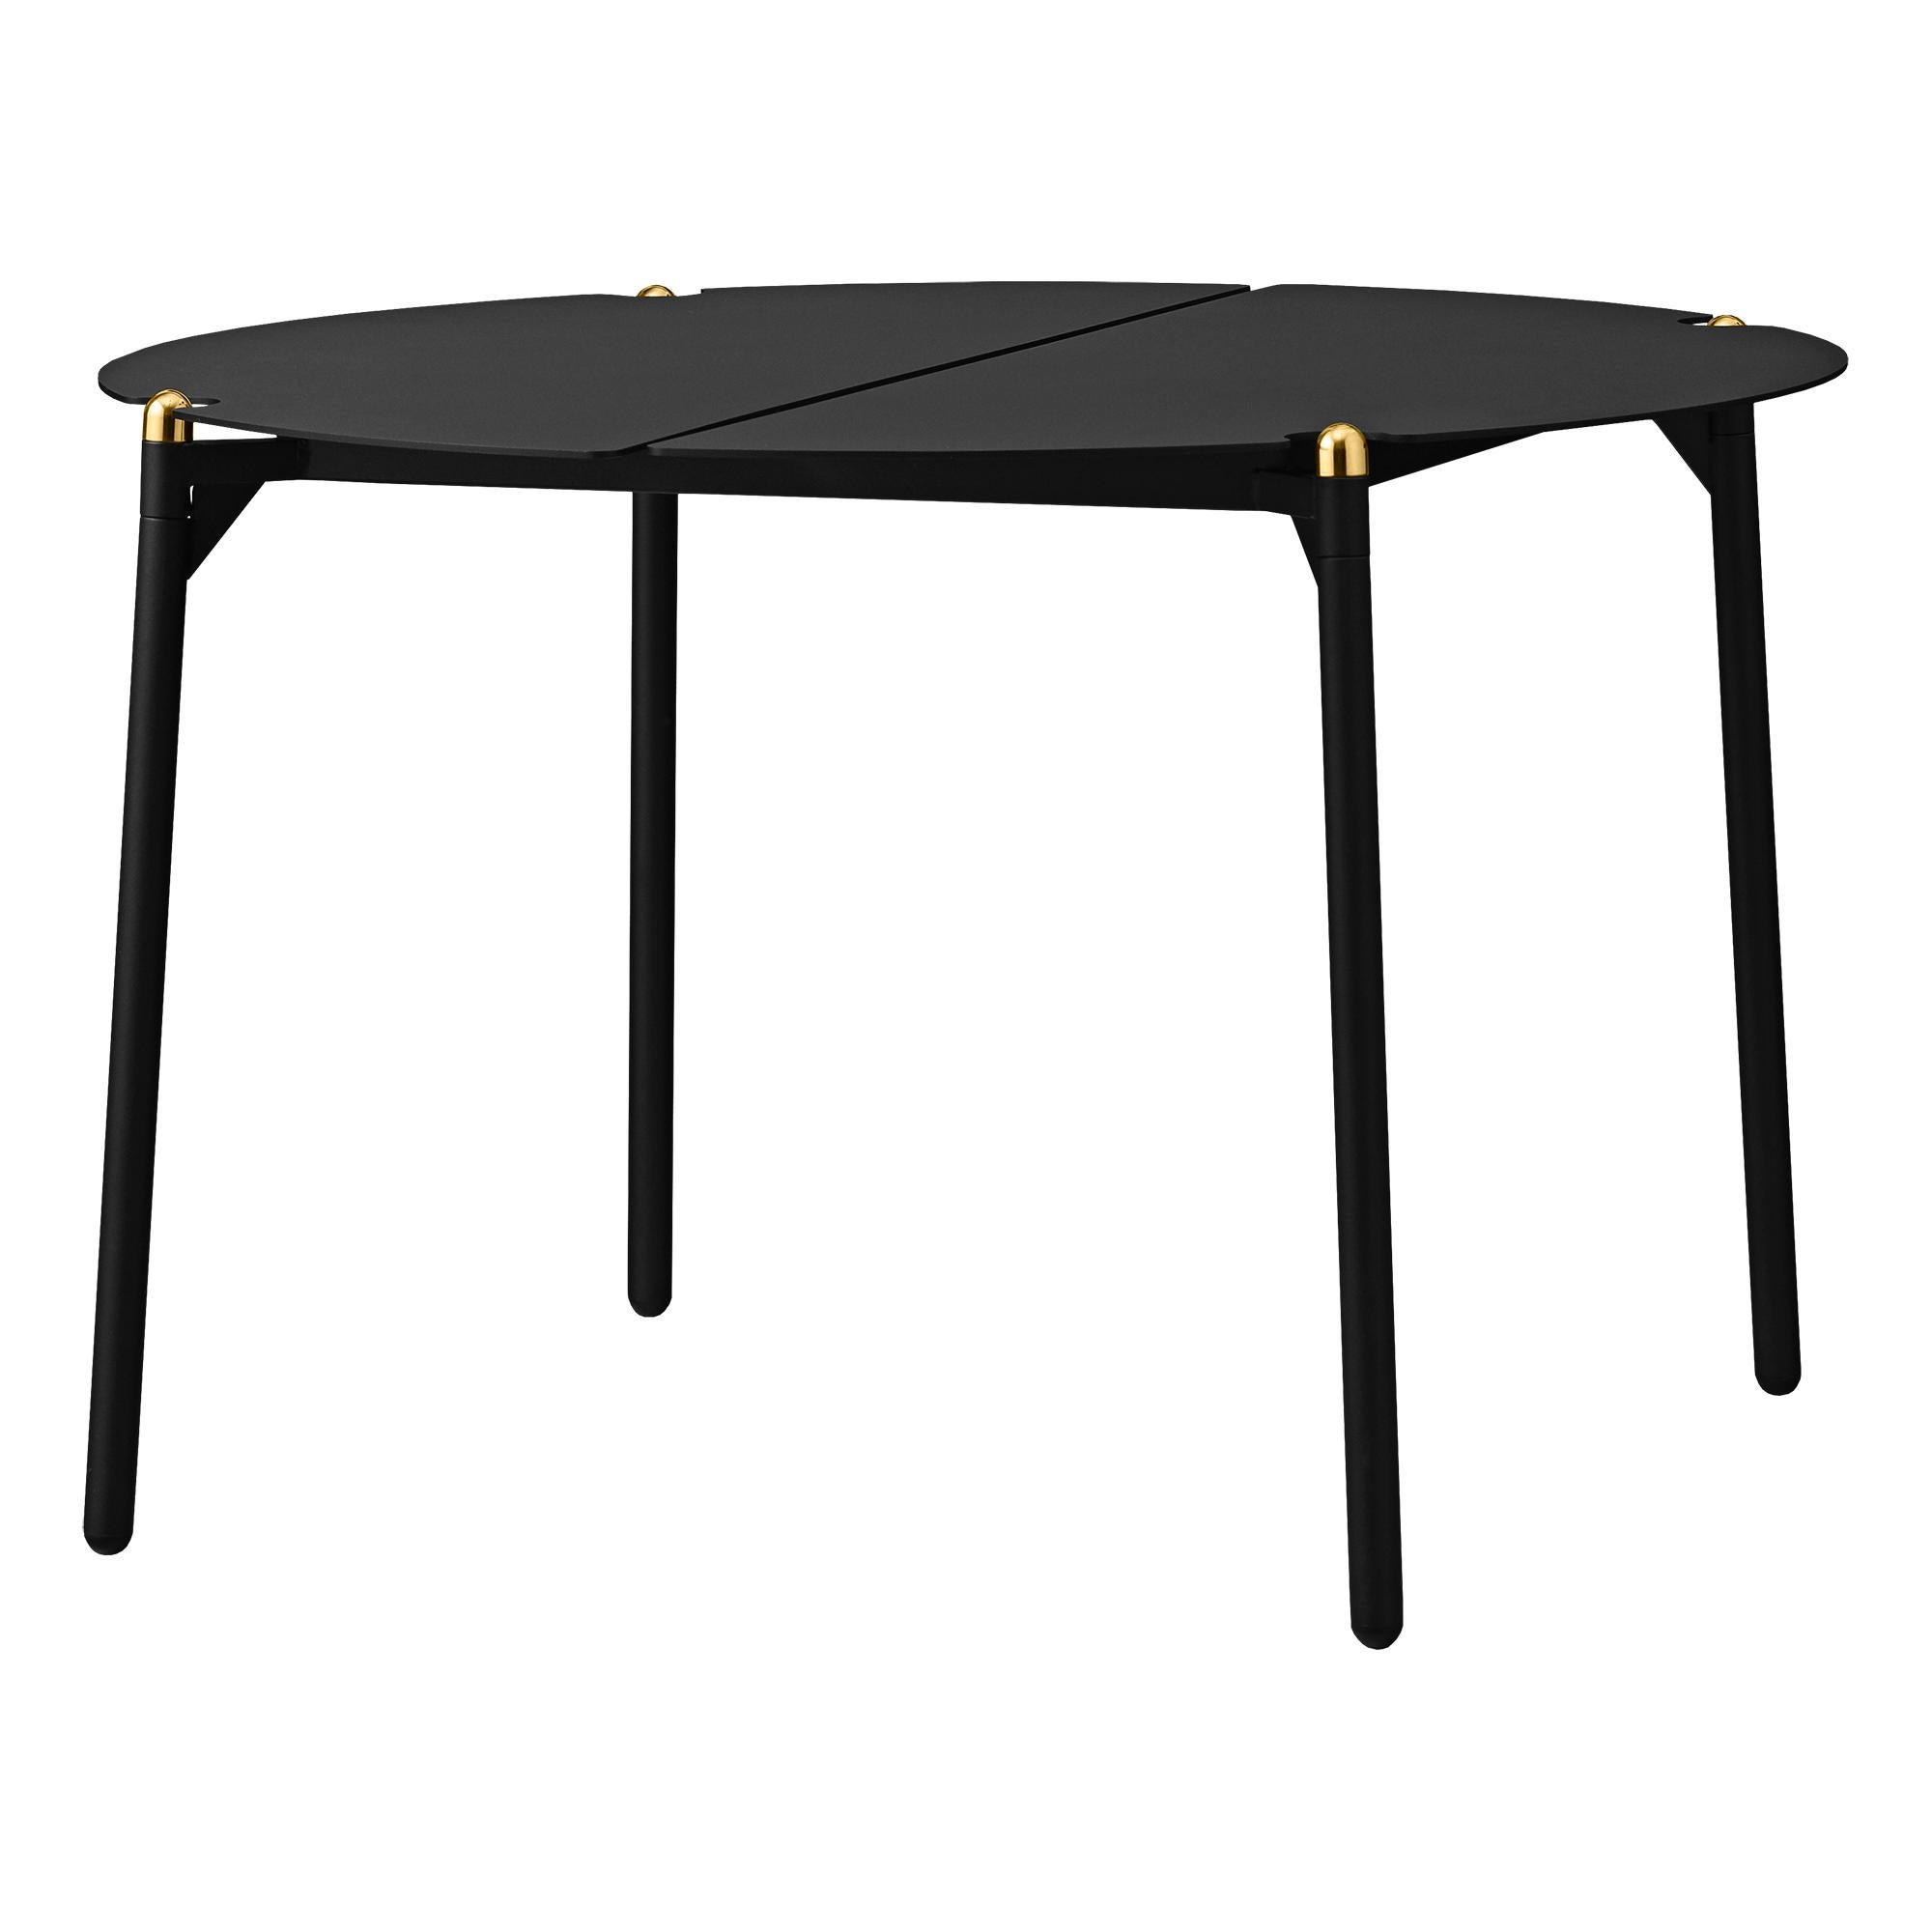 Large black and gold minimalist lounge table
Dimensions: Diameter 70 x H 45 cm 
Materials: Steel w. Matte Powder Coating, Aluminum w. Matte Powder Coating & Stainless Steel w. Gold Titanium Plating.
Available in colors: Taupe, Bordeaux, Forest,